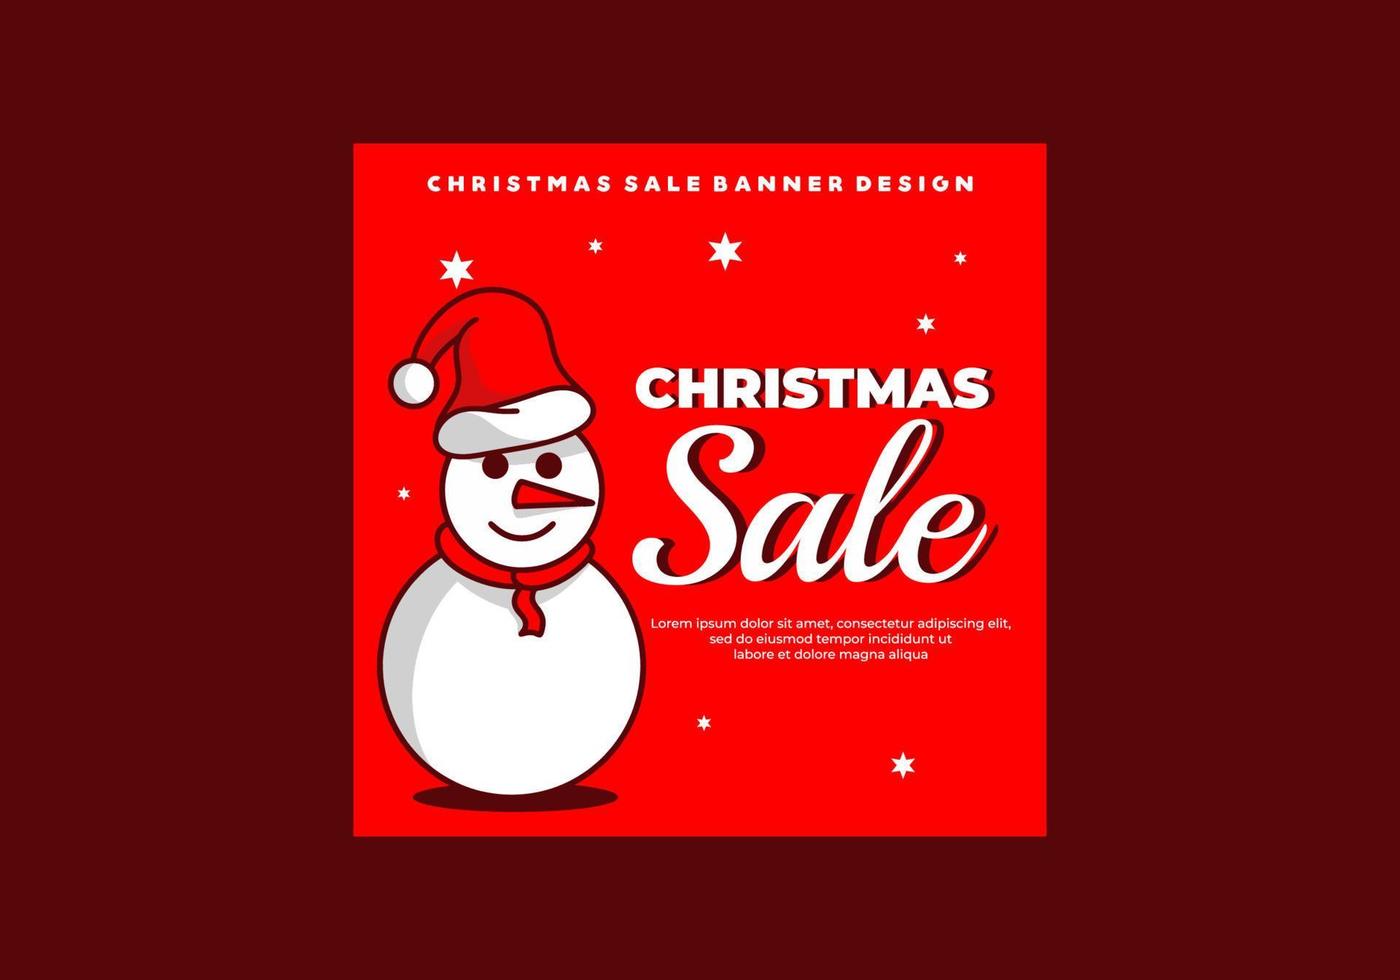 Christmas social media banner and ads design in red color vector